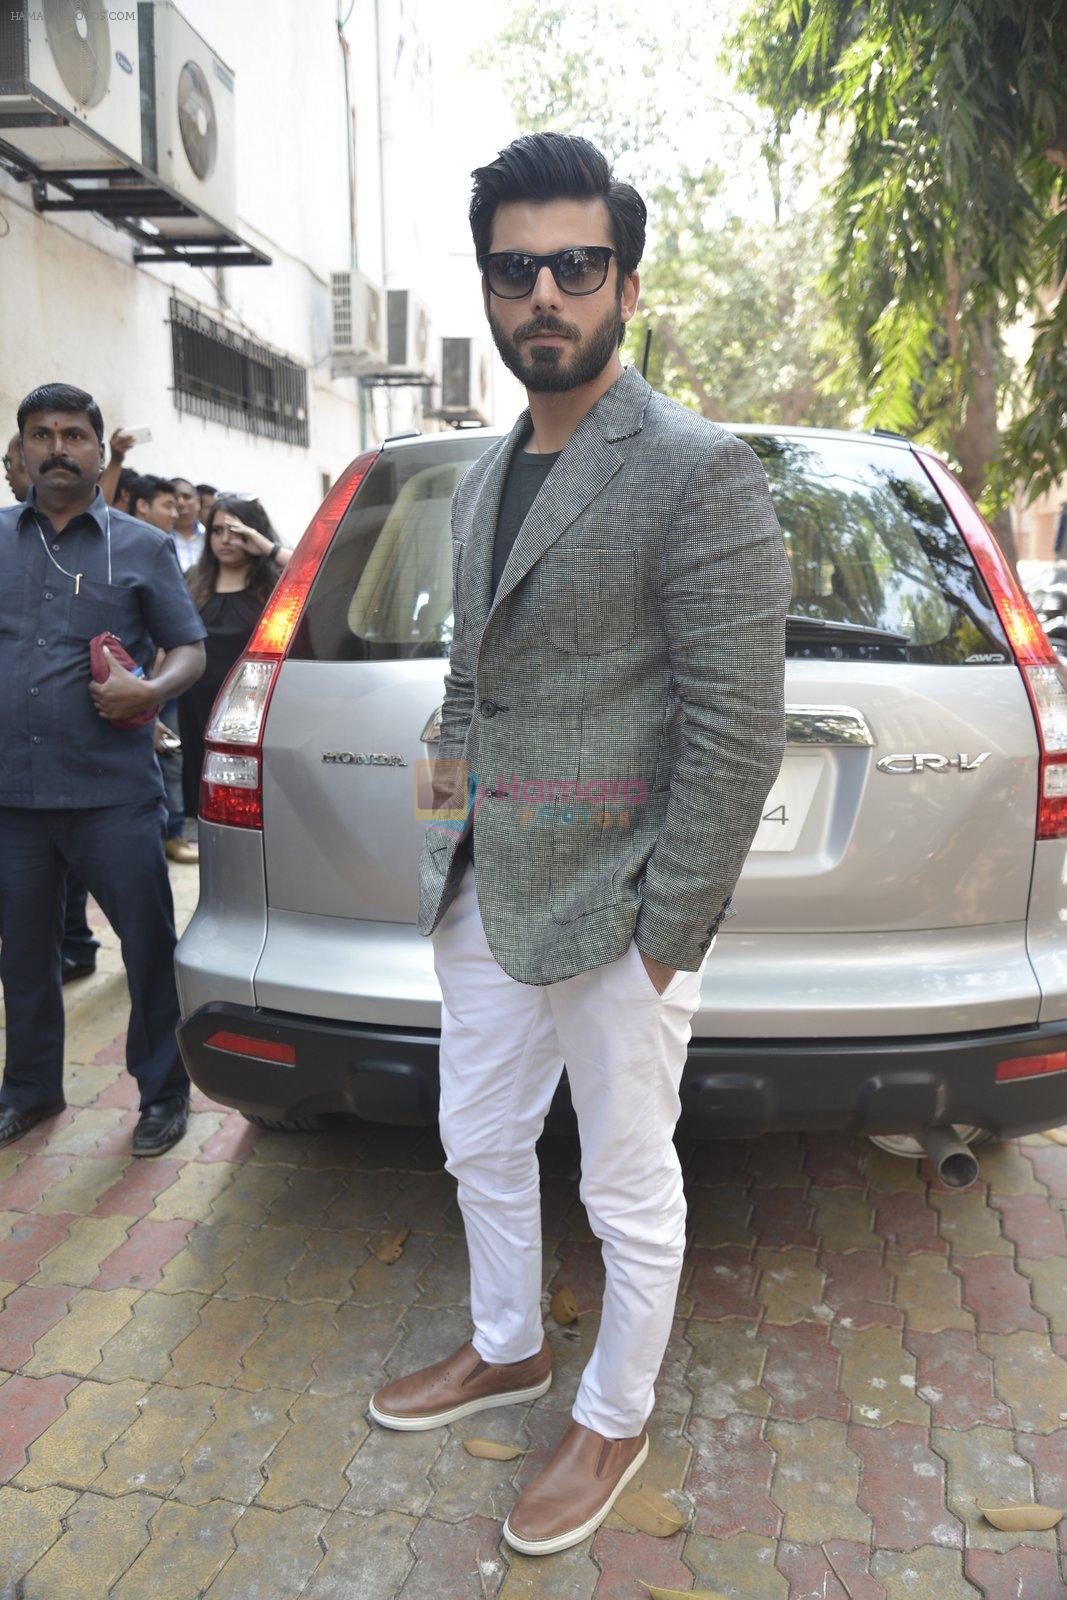 Fawad Khan at Filmfare cover launch on 7th March 2016